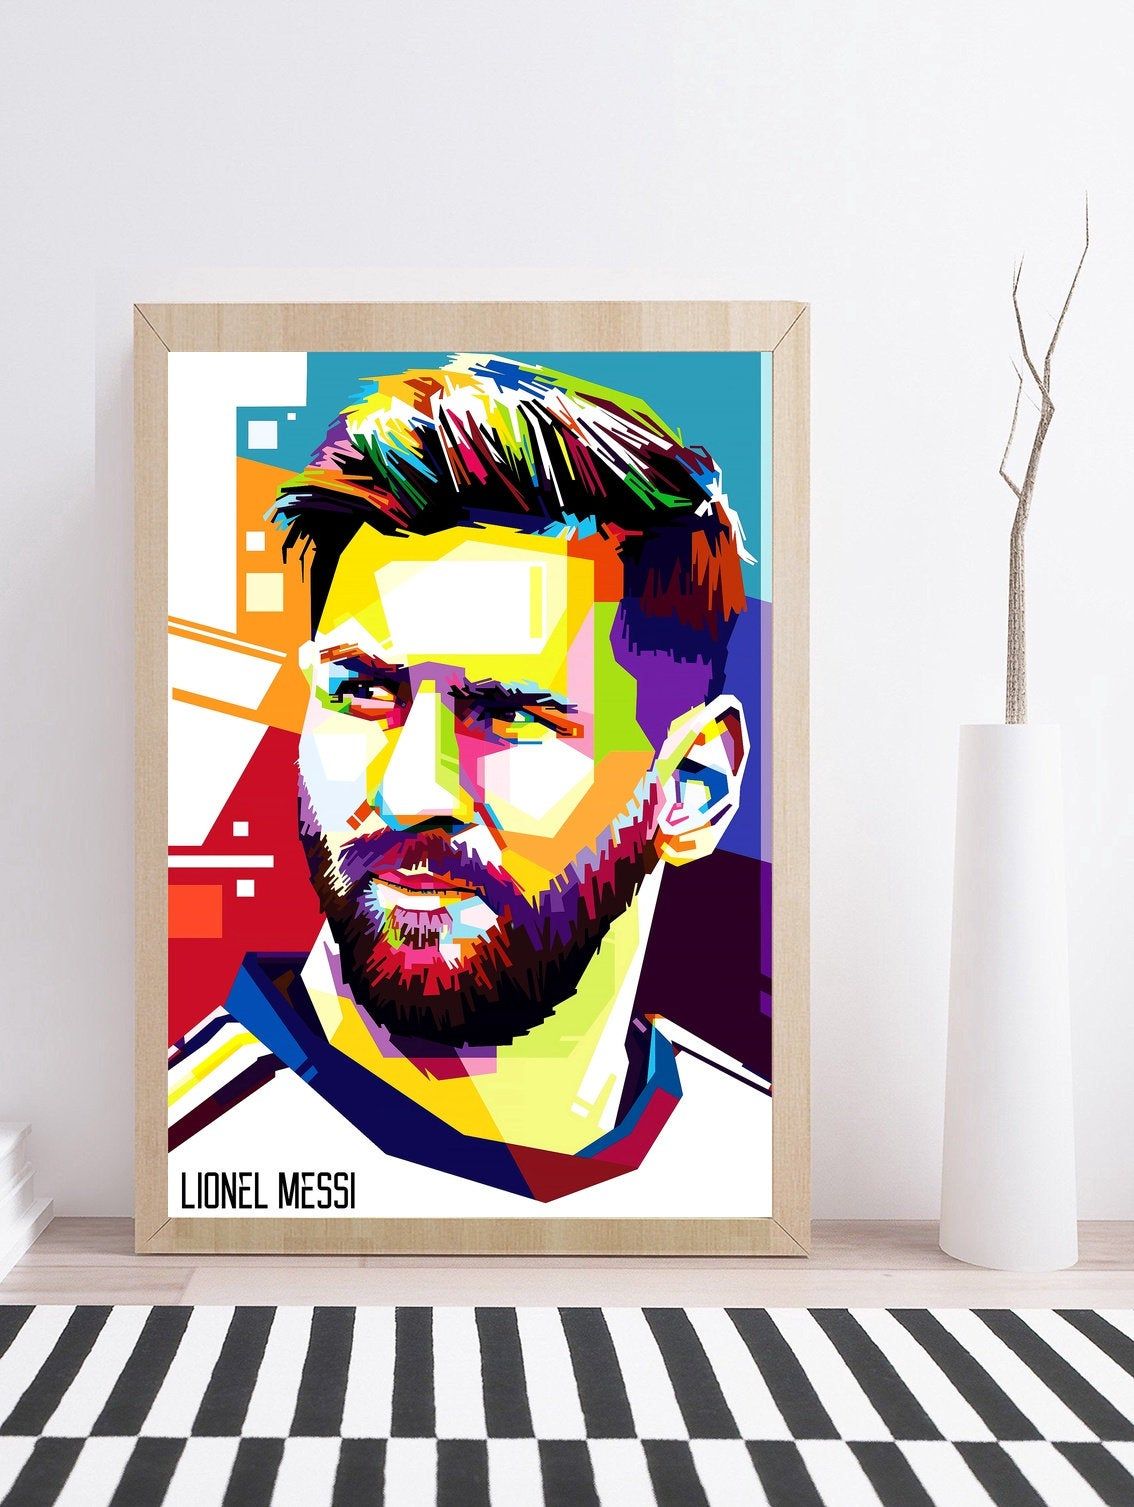 Lionel Messi Posterlionel Messi Art Lionel Messi Poster Canvas Wall Art Print Violetteee 0684